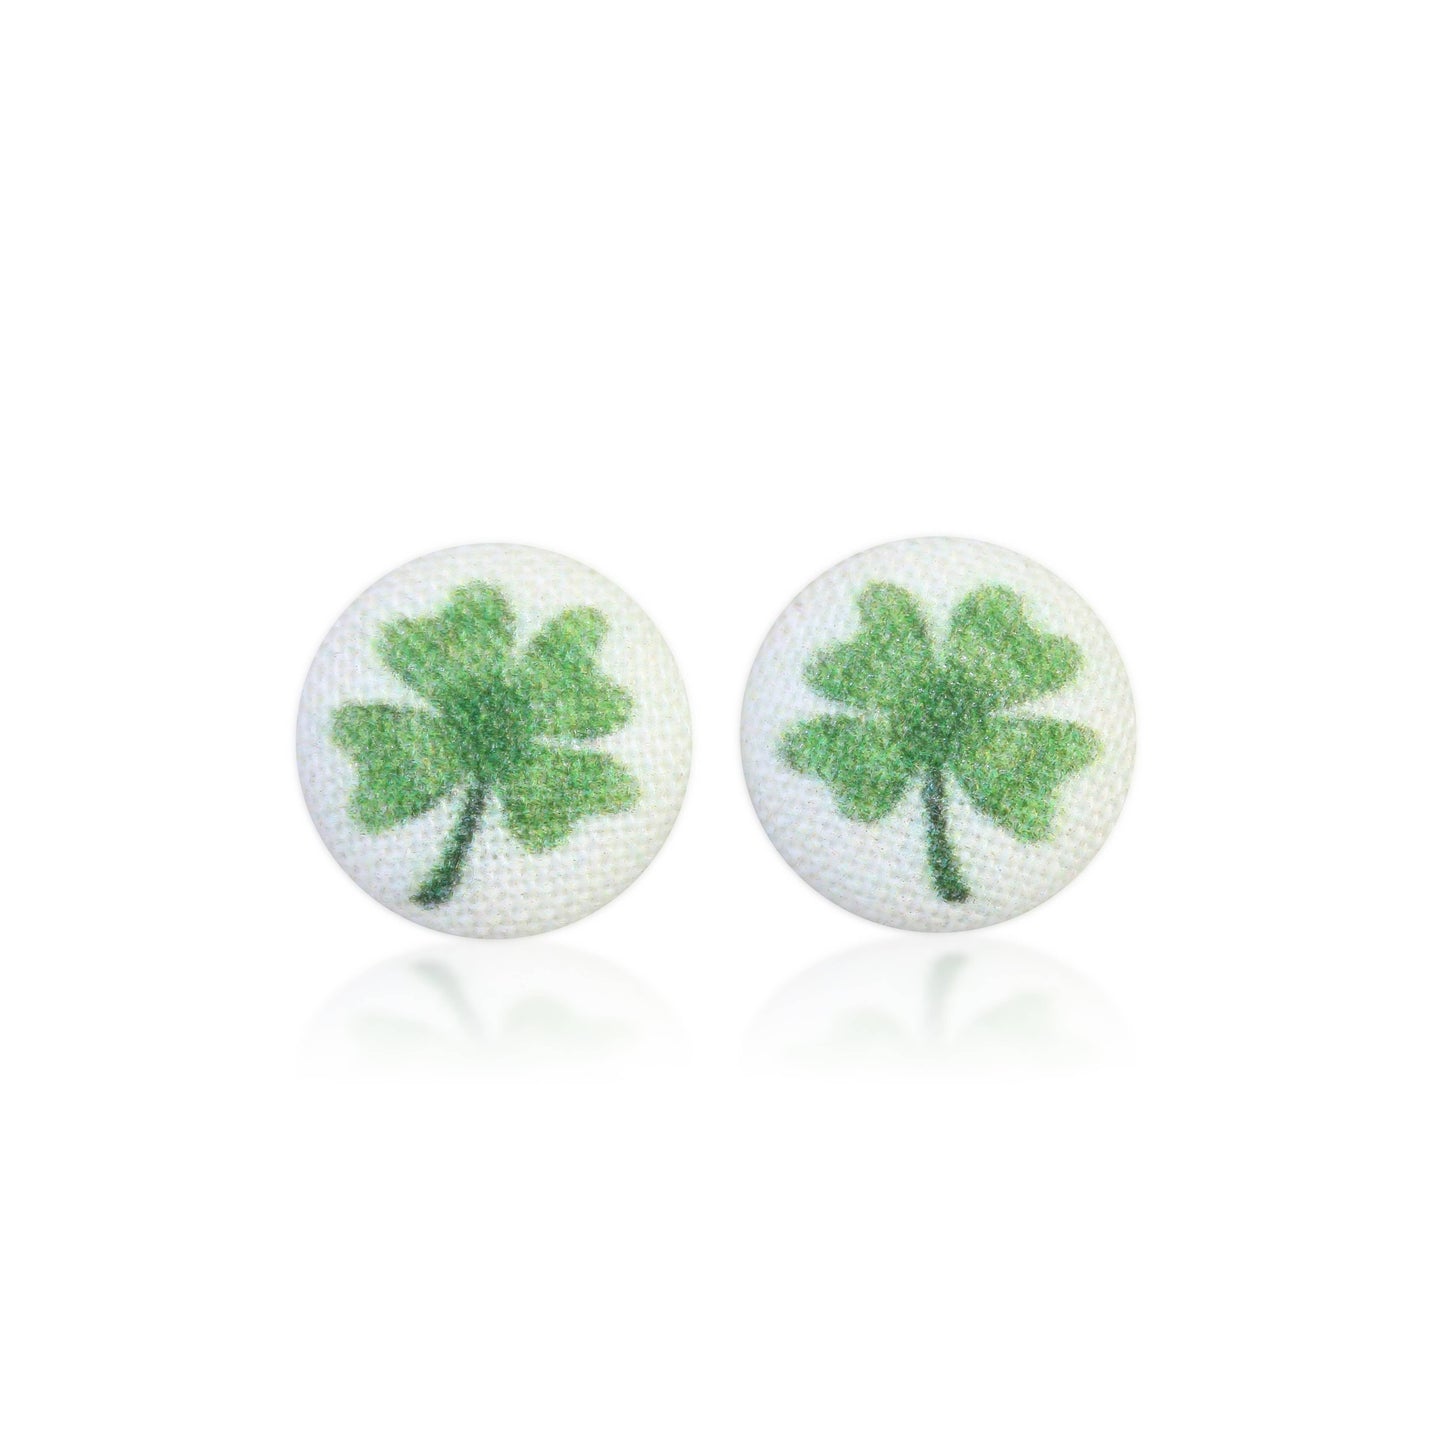 Four Leaf Clover (small) Fabric button Stud Earrings